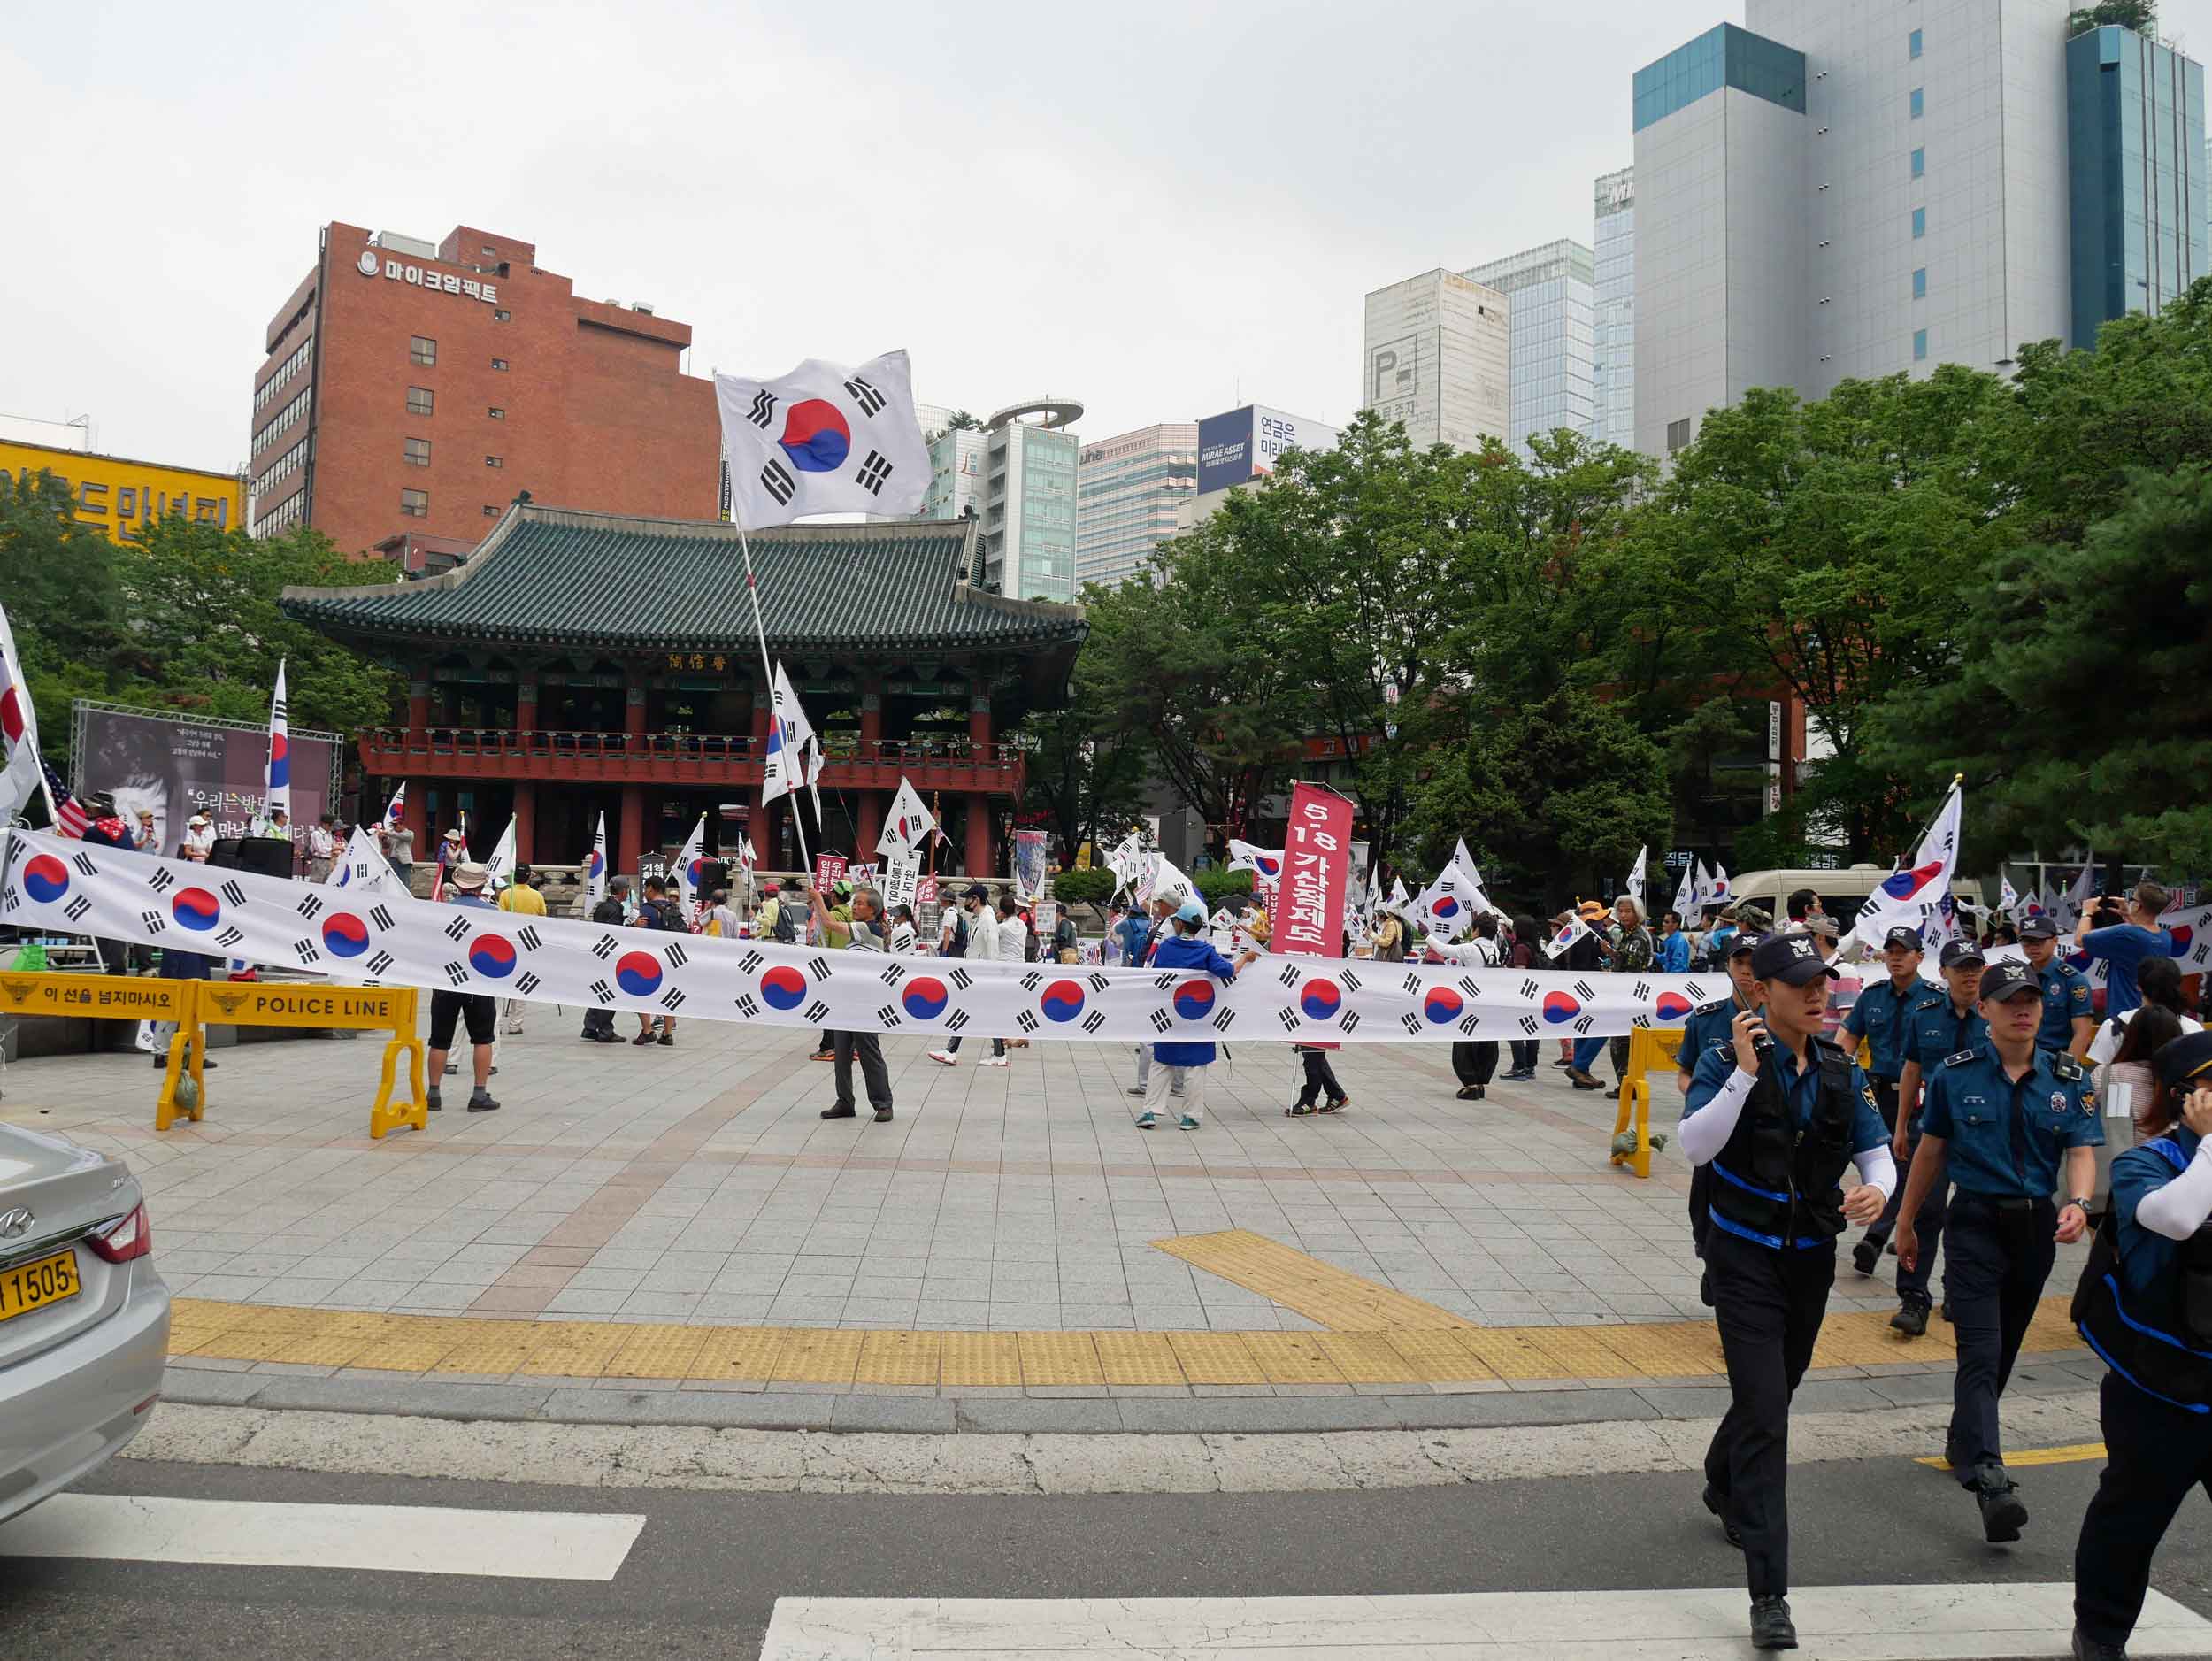  As we walked about the city, we passed a large protest for the release of former South Korean President Park Geun-hye who's on trial for corruption.&nbsp; 